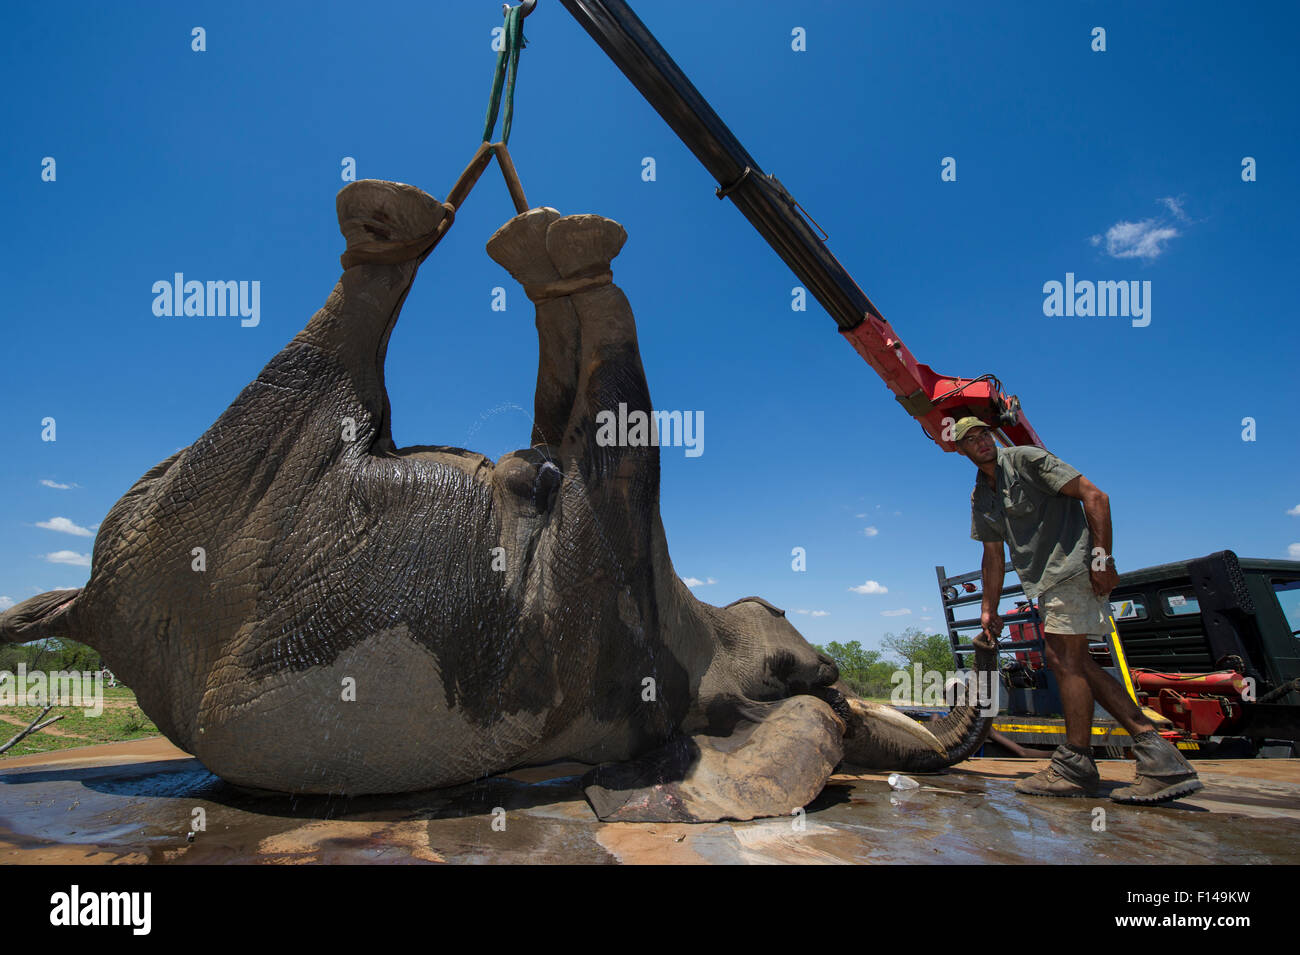 Team of people using crane to unload tranquillised Elephant (Loxodonta africana). The Elephants had been darted from a helicopter in order to be returned to the reserve they had escaped from. Zimbabwe, November 2013. Model released. Stock Photo